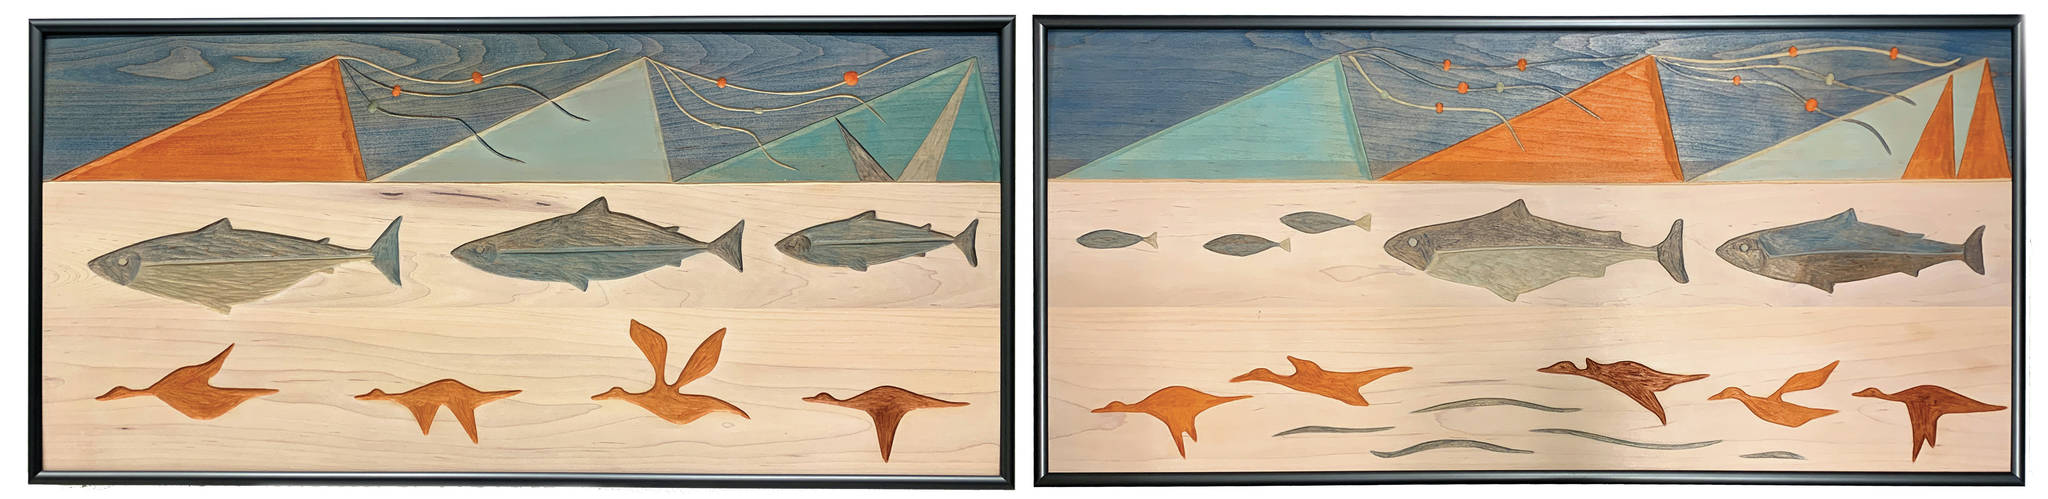 Ron Senungetuk’s “Nahzvaliq” is part of the Pratt Museum’s permanent collection. It was a Pratt Museum Juried Art Show Purchase, Award for 2001. Of his work, he wrote, “A place with lakes, portrays birds skimming and fish swimming. In spring lack of sleep may cause one to imagine mountains as something else. The setting for this work is Bering Strait, a splendid route for migration of fish, birds and animals.” (Photo courtesy of Pratt Museum)